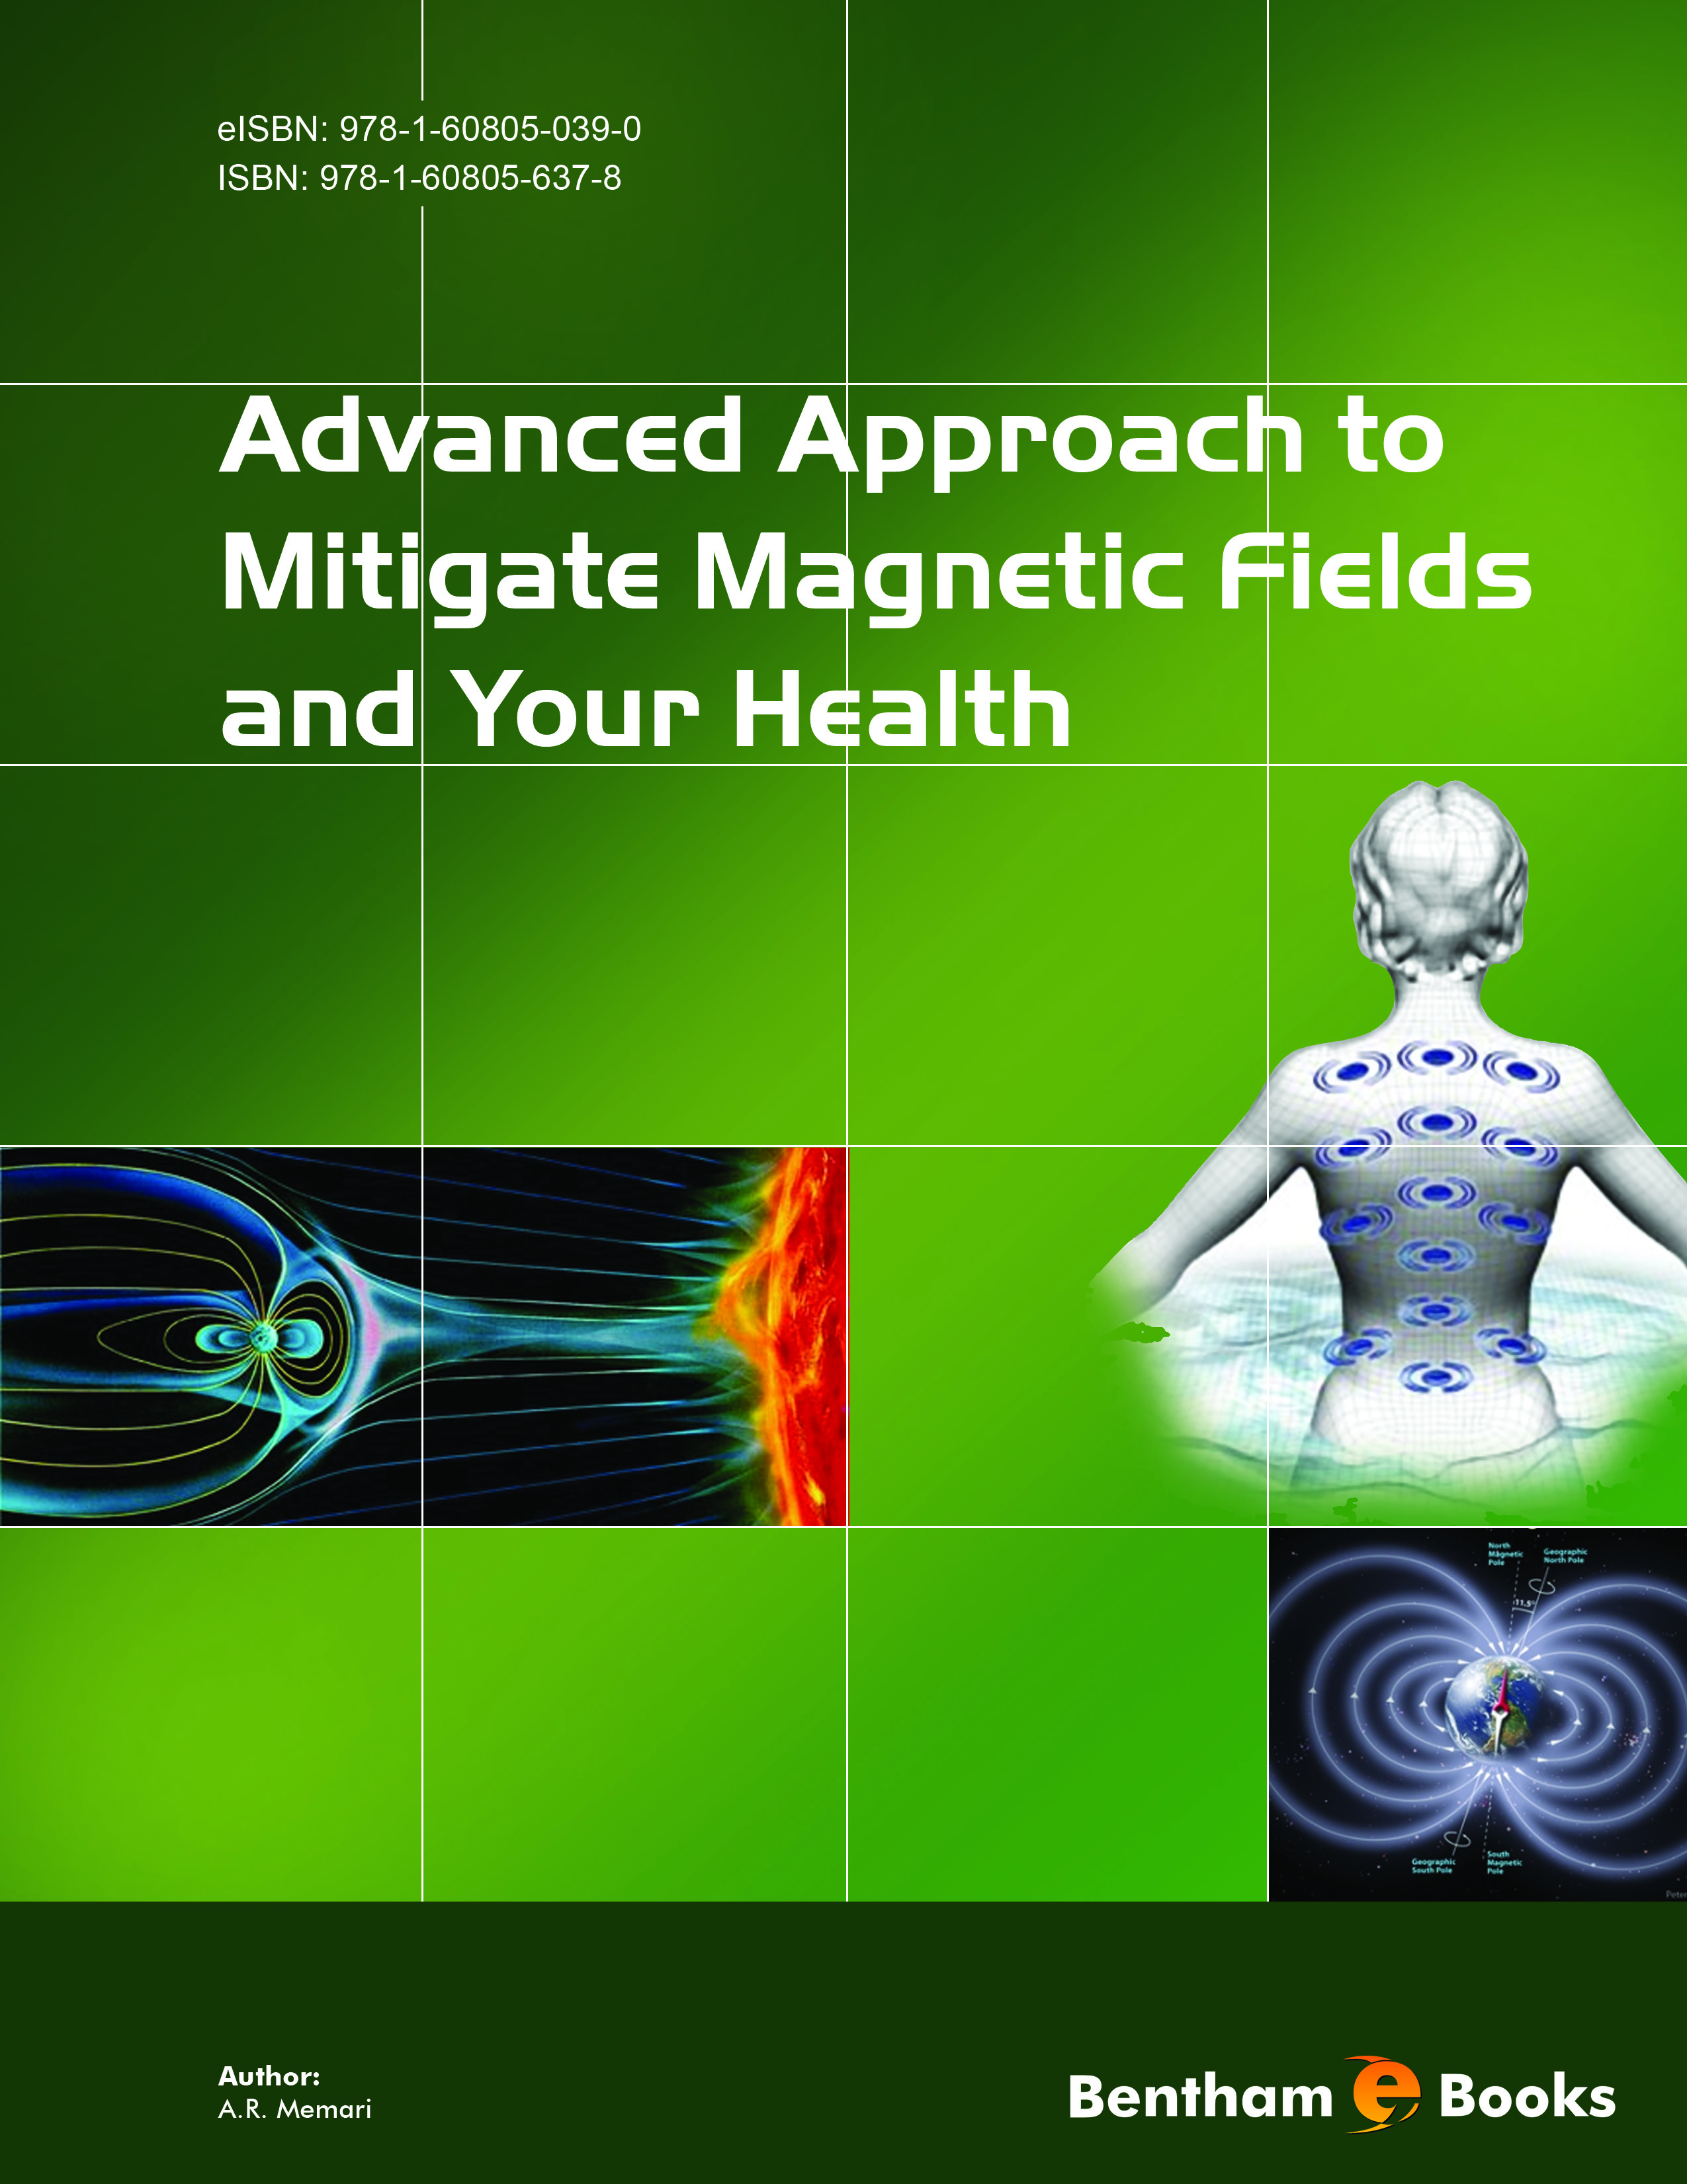 Advanced Approach to Mitigate Magnetic Fields and Your Health